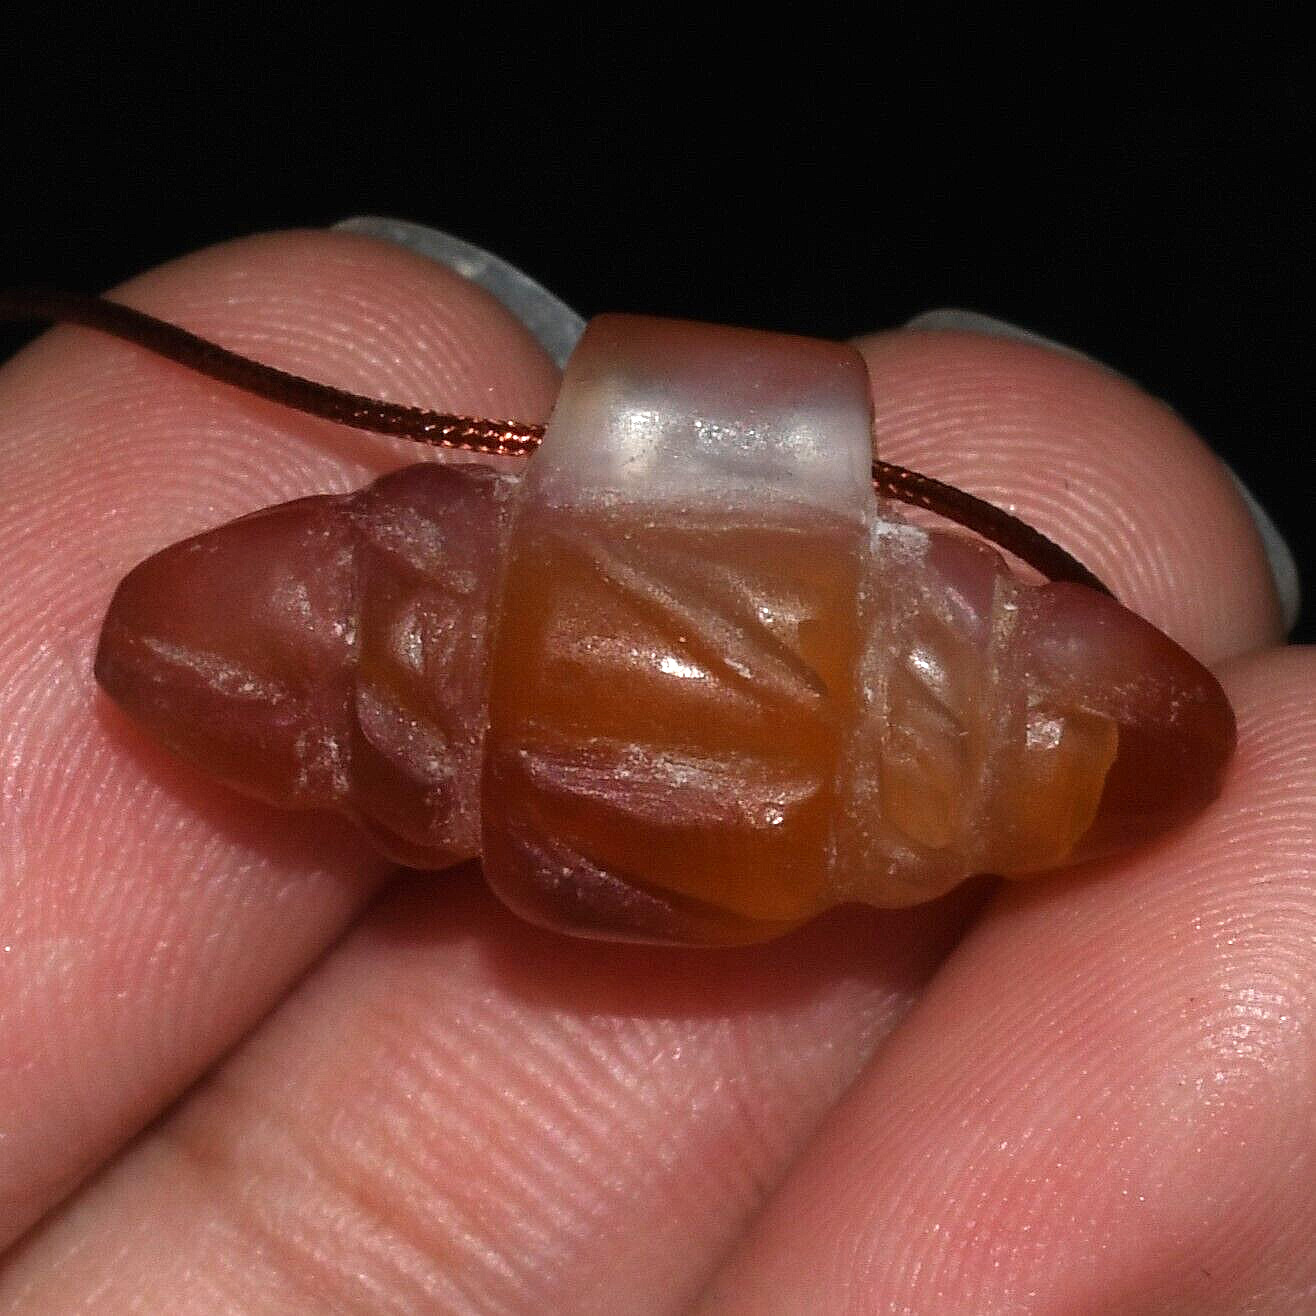 Genuine Ancient Near Eastern Carnelian Stone Amulet Bead in Good Condition